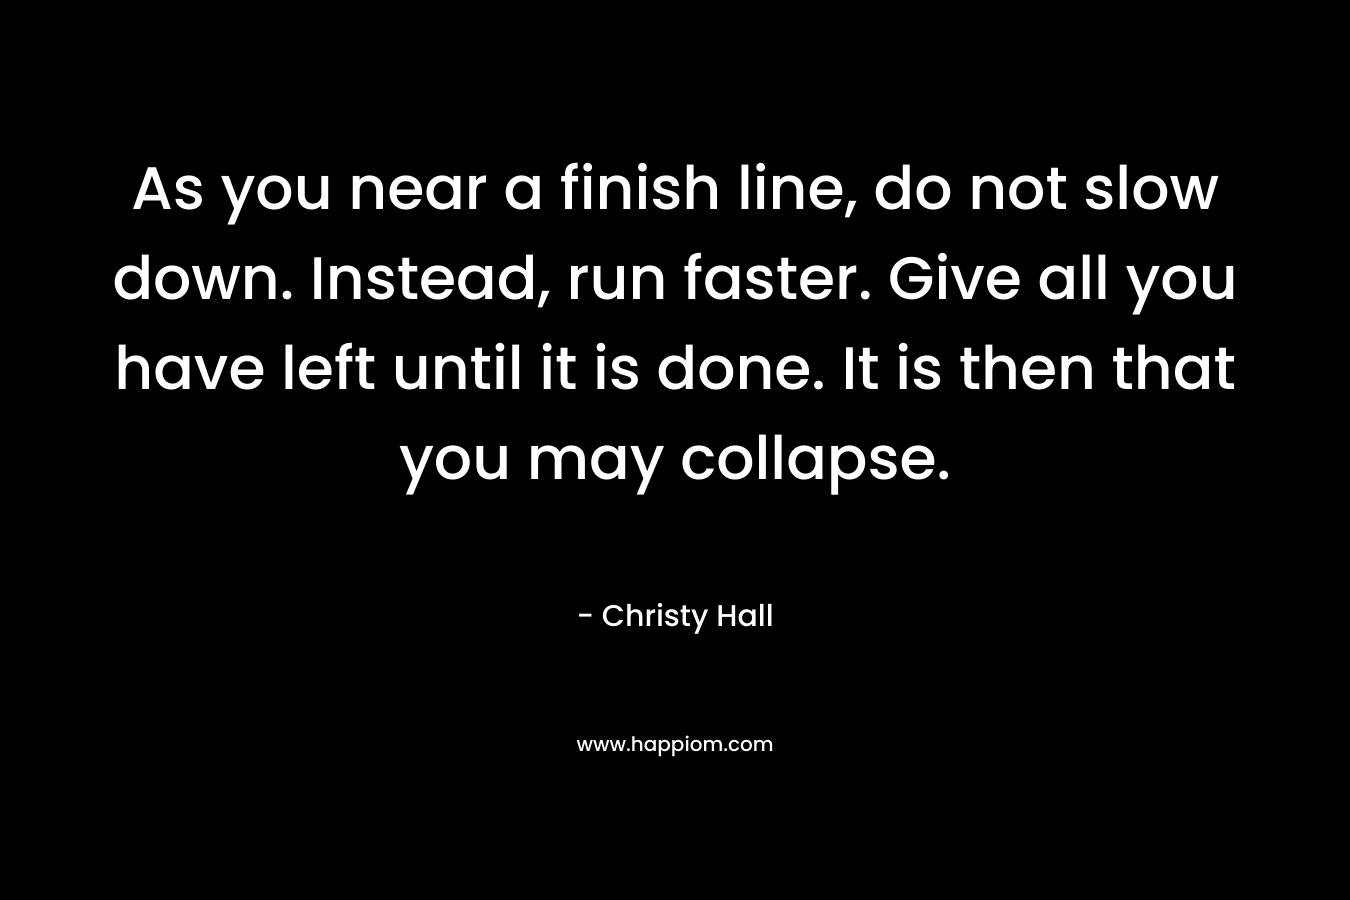 As you near a finish line, do not slow down. Instead, run faster. Give all you have left until it is done. It is then that you may collapse.